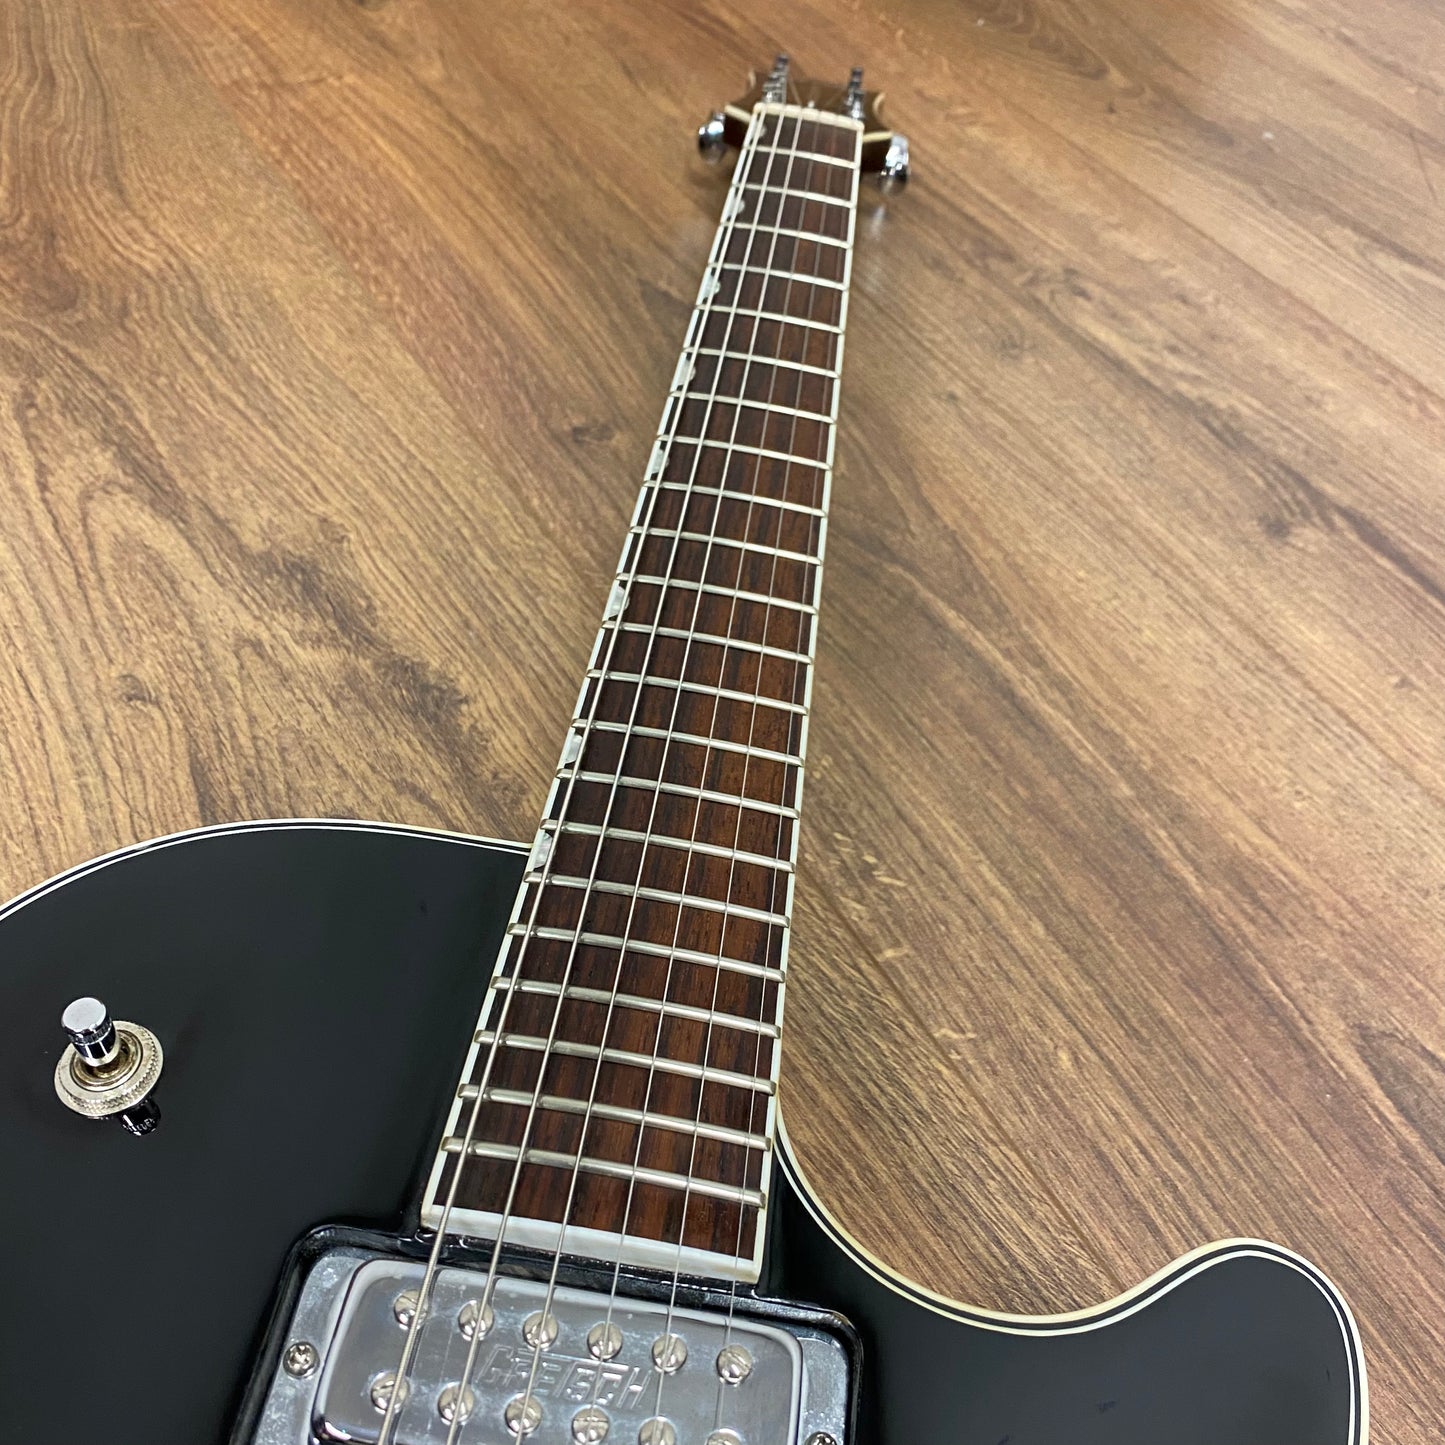 Pre-Owned Gretsch G5235T Electromatic Pro Jet - Black - 2008